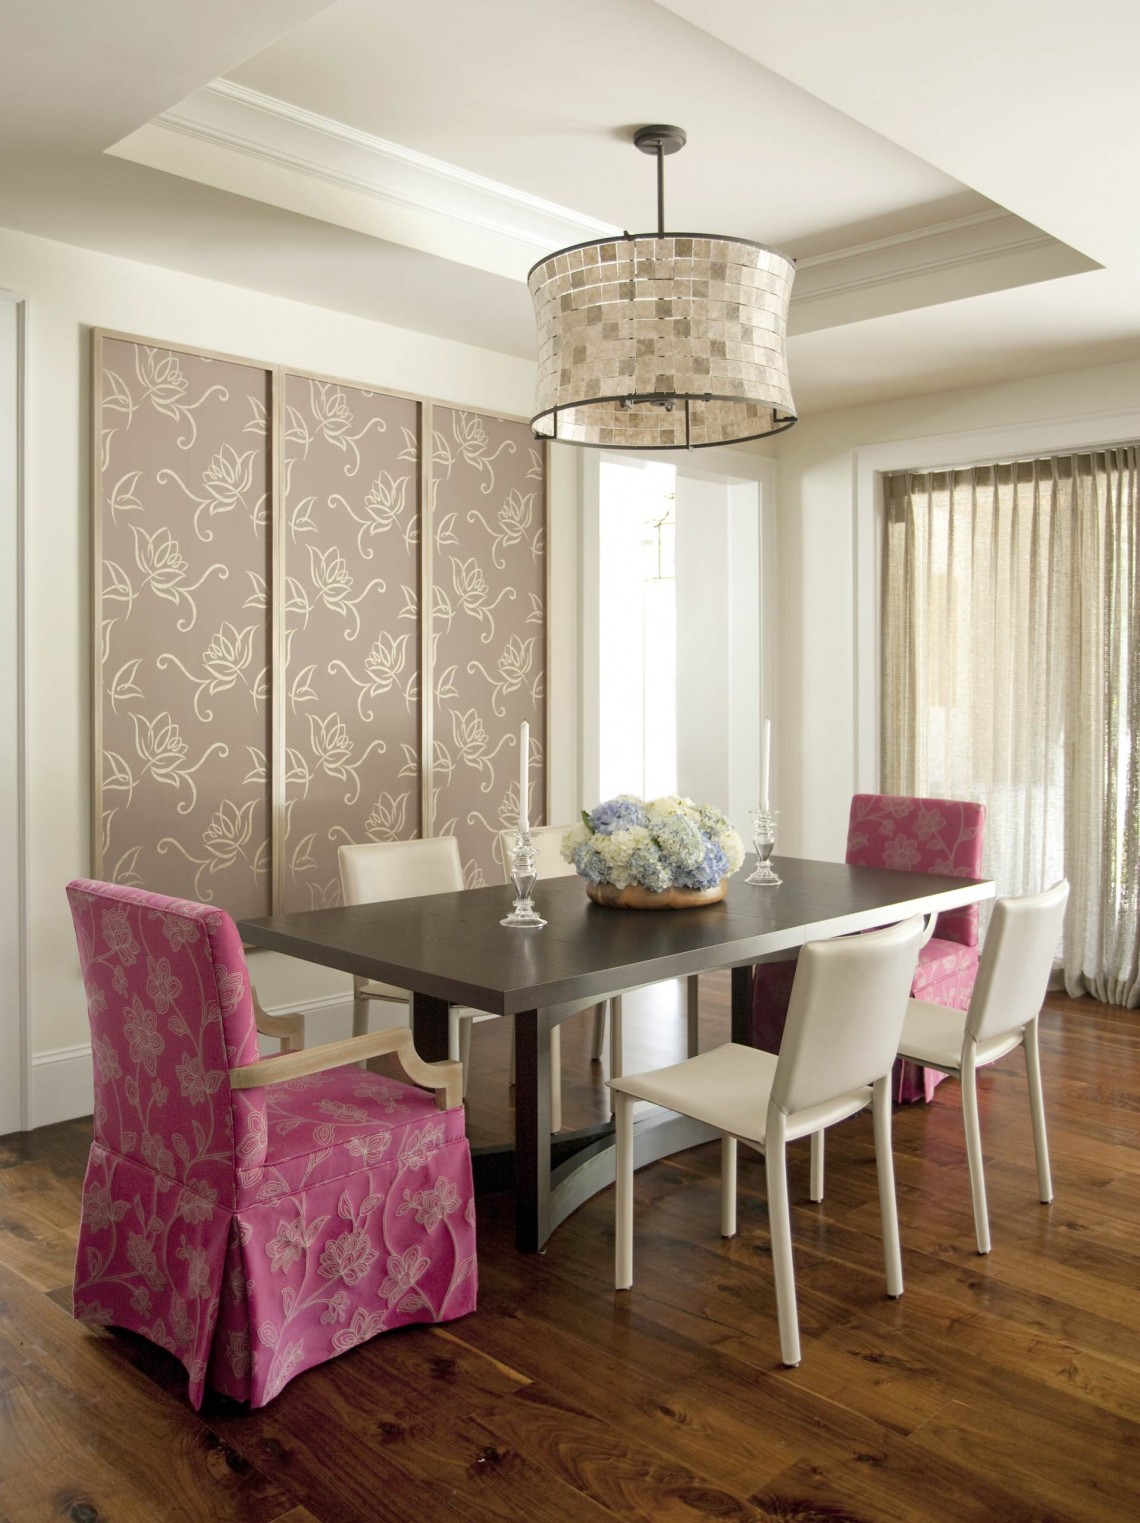 Elegant dining table with classic light